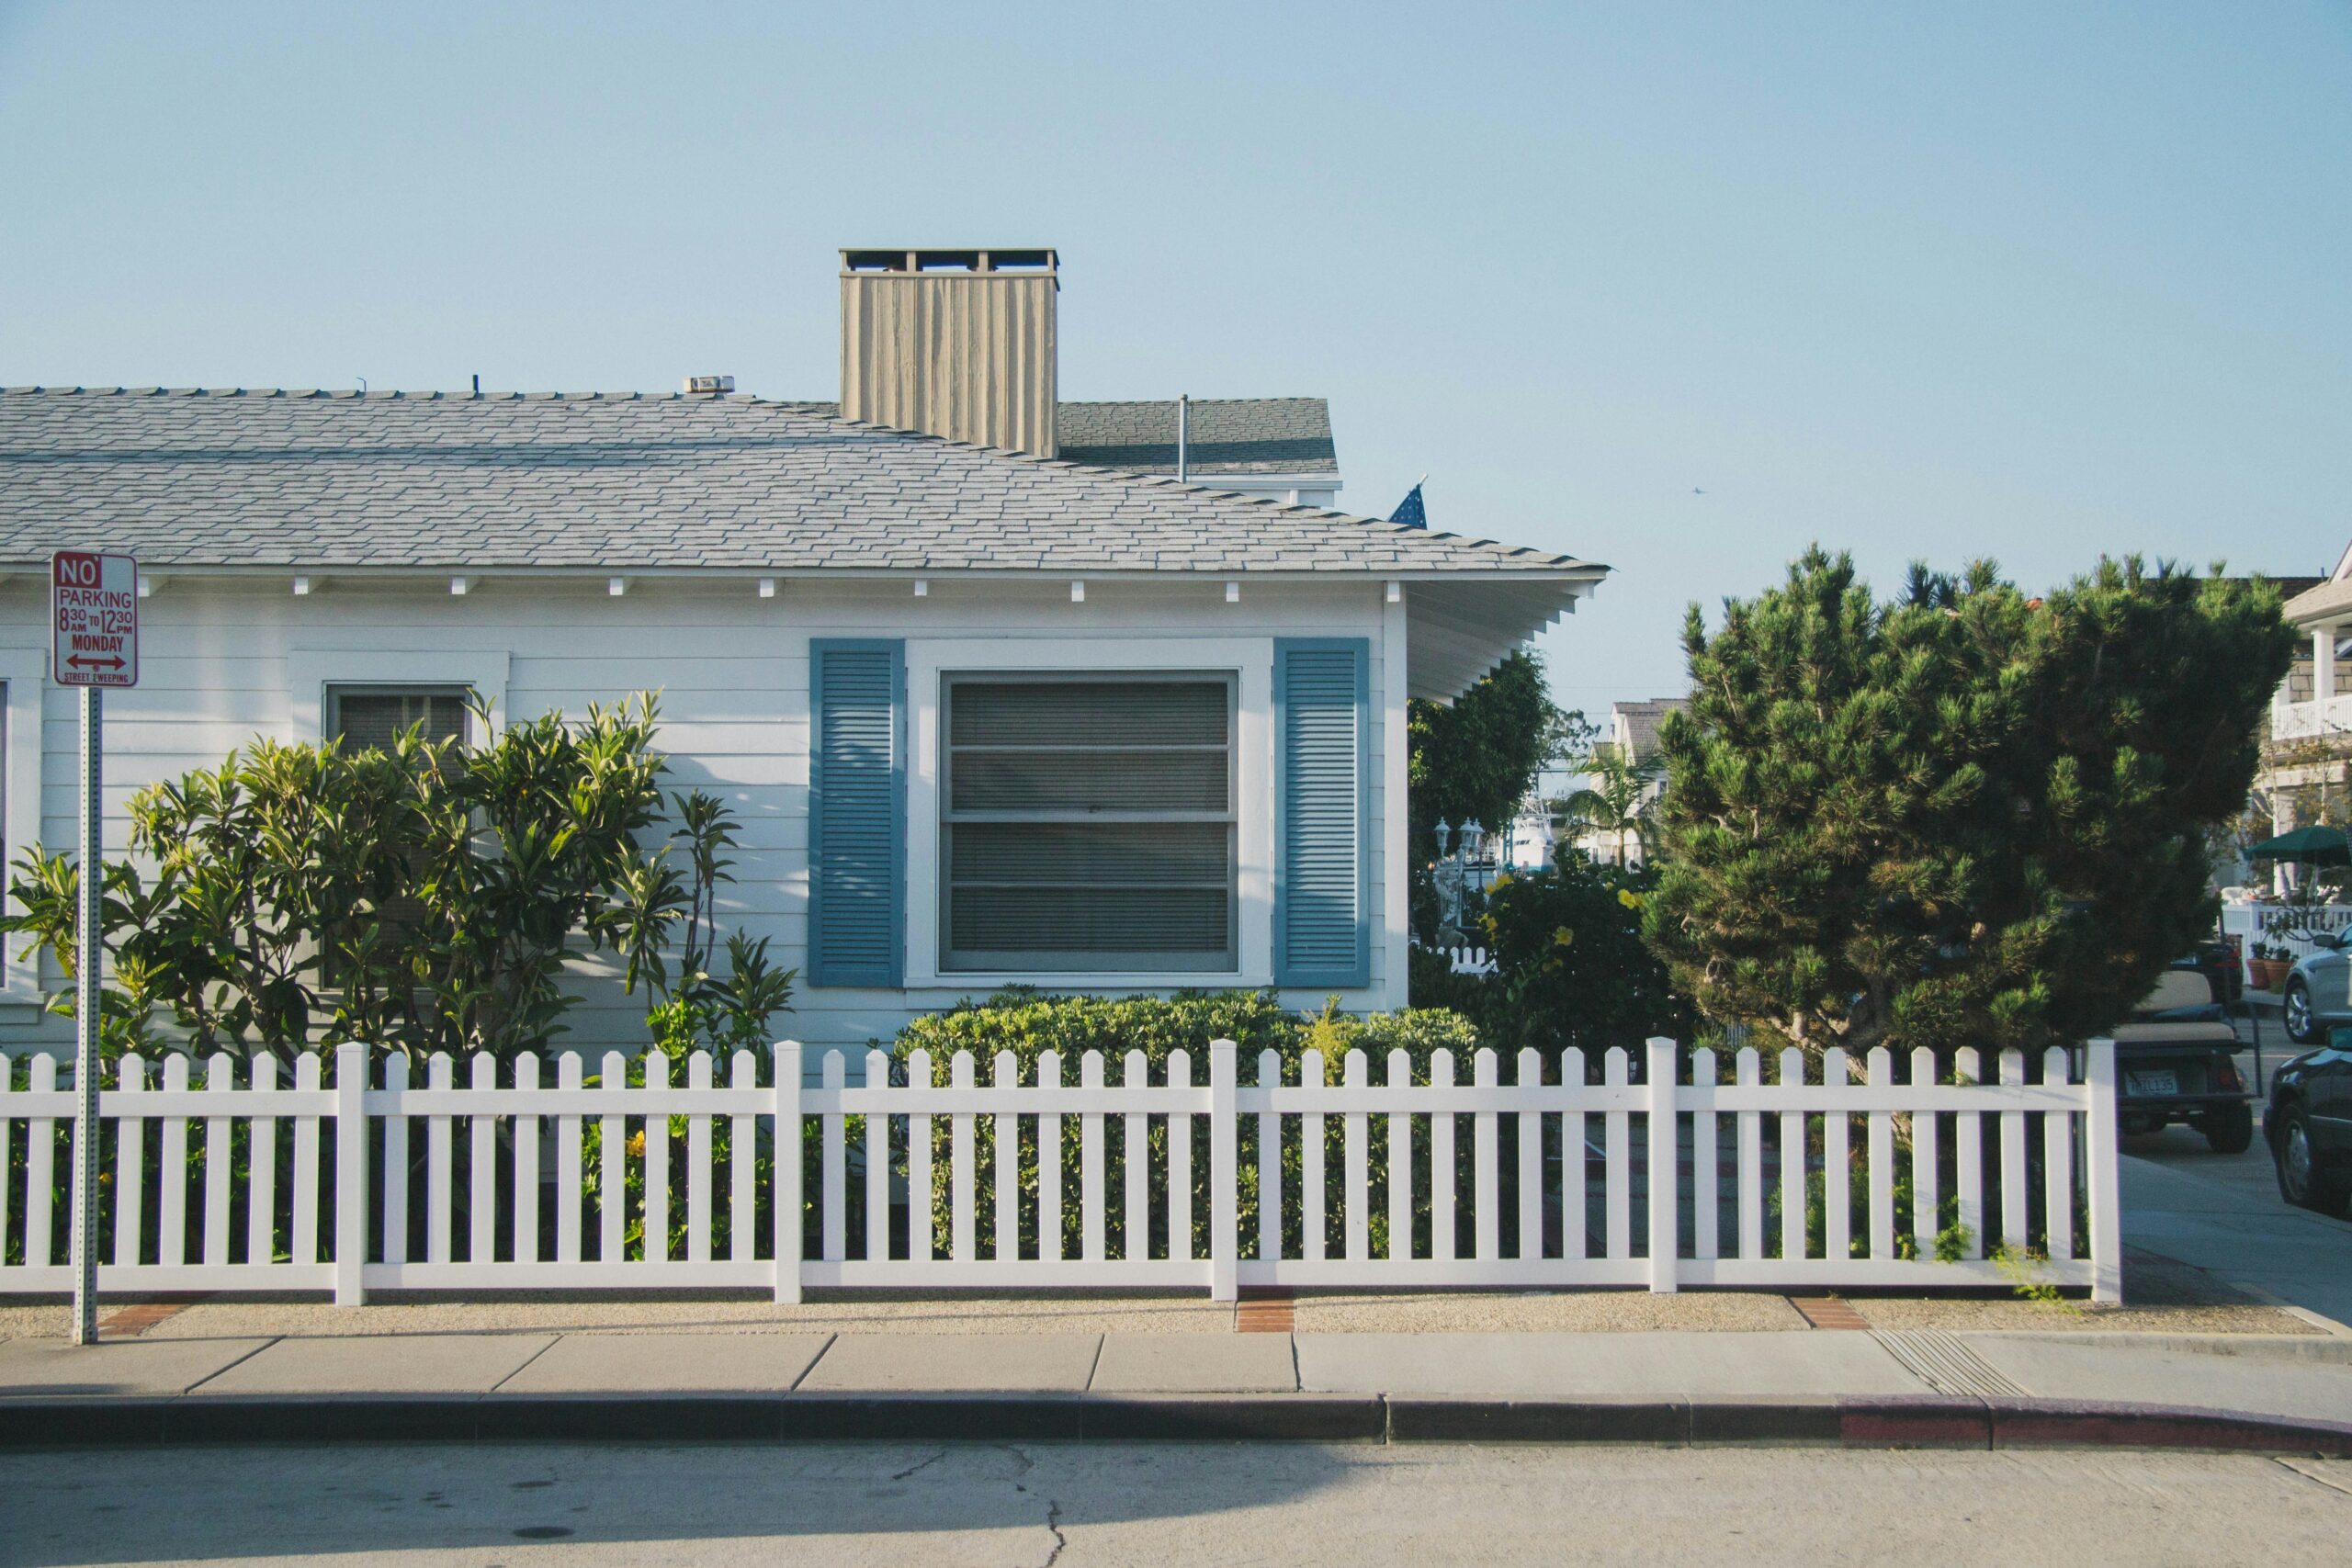 A beach house that sits on a street corner with a white picket fence.